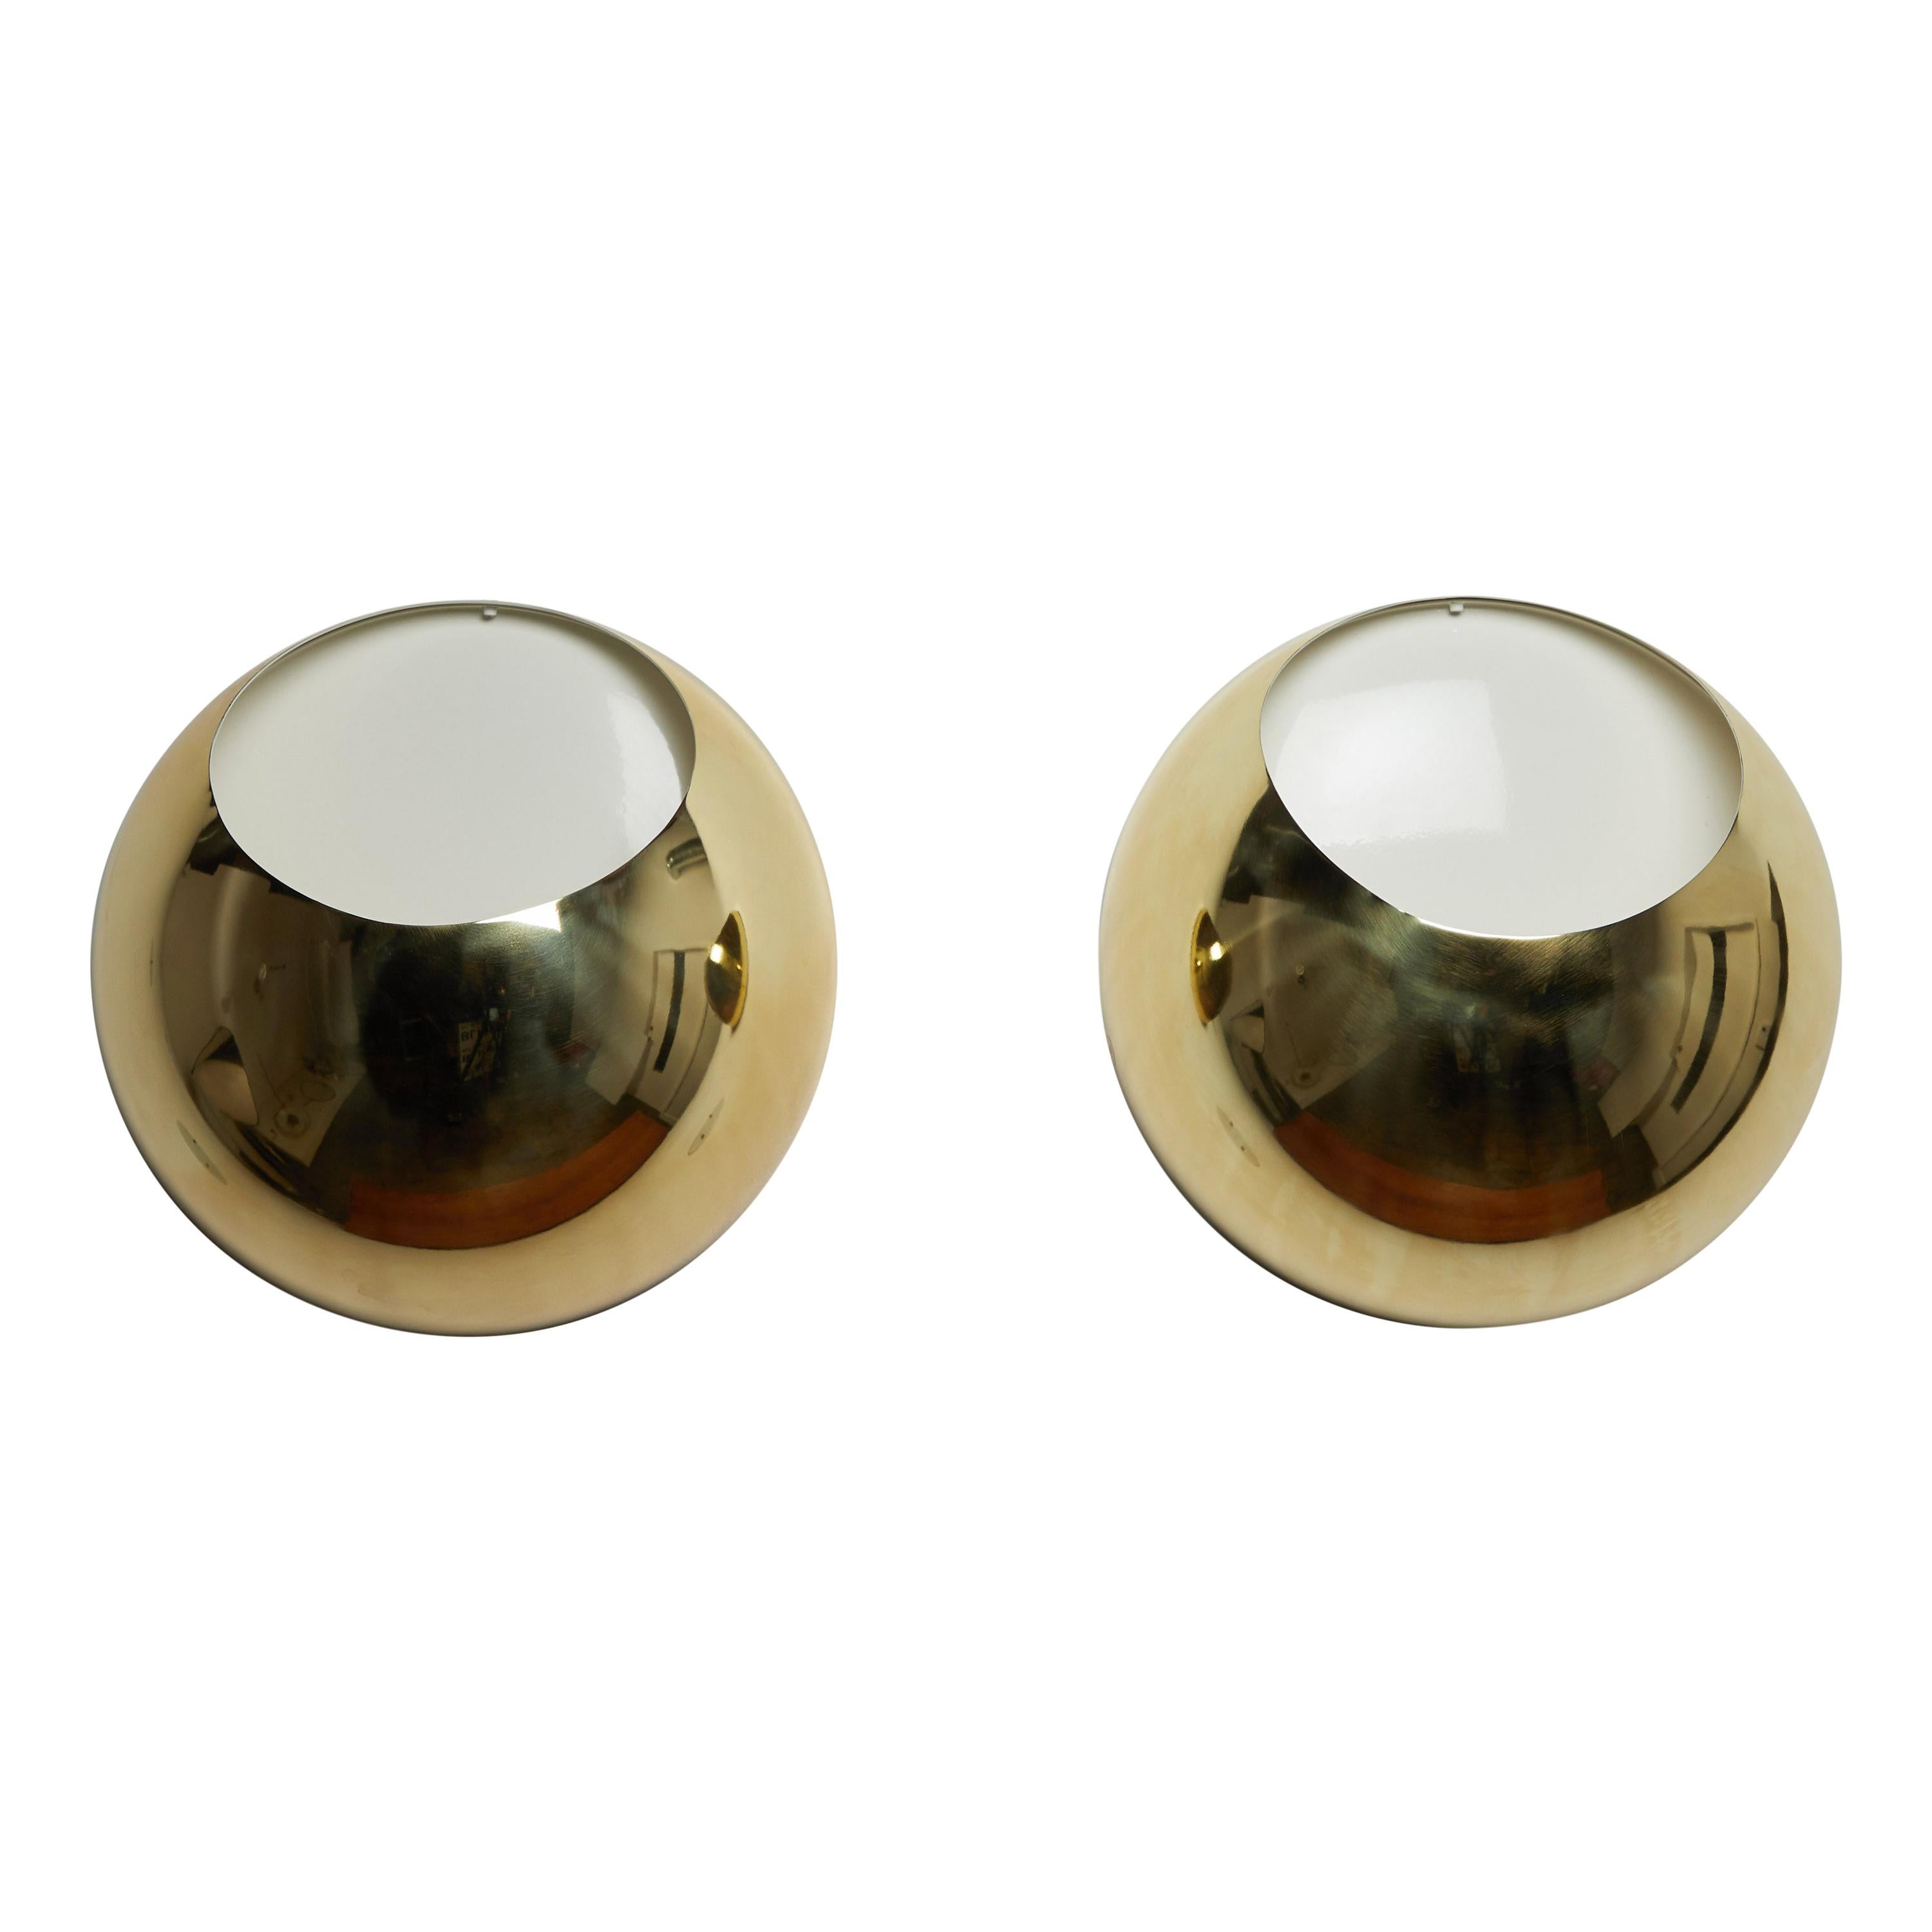 Pair of "Kil" Sconces by Angelo Brotto for Esperia